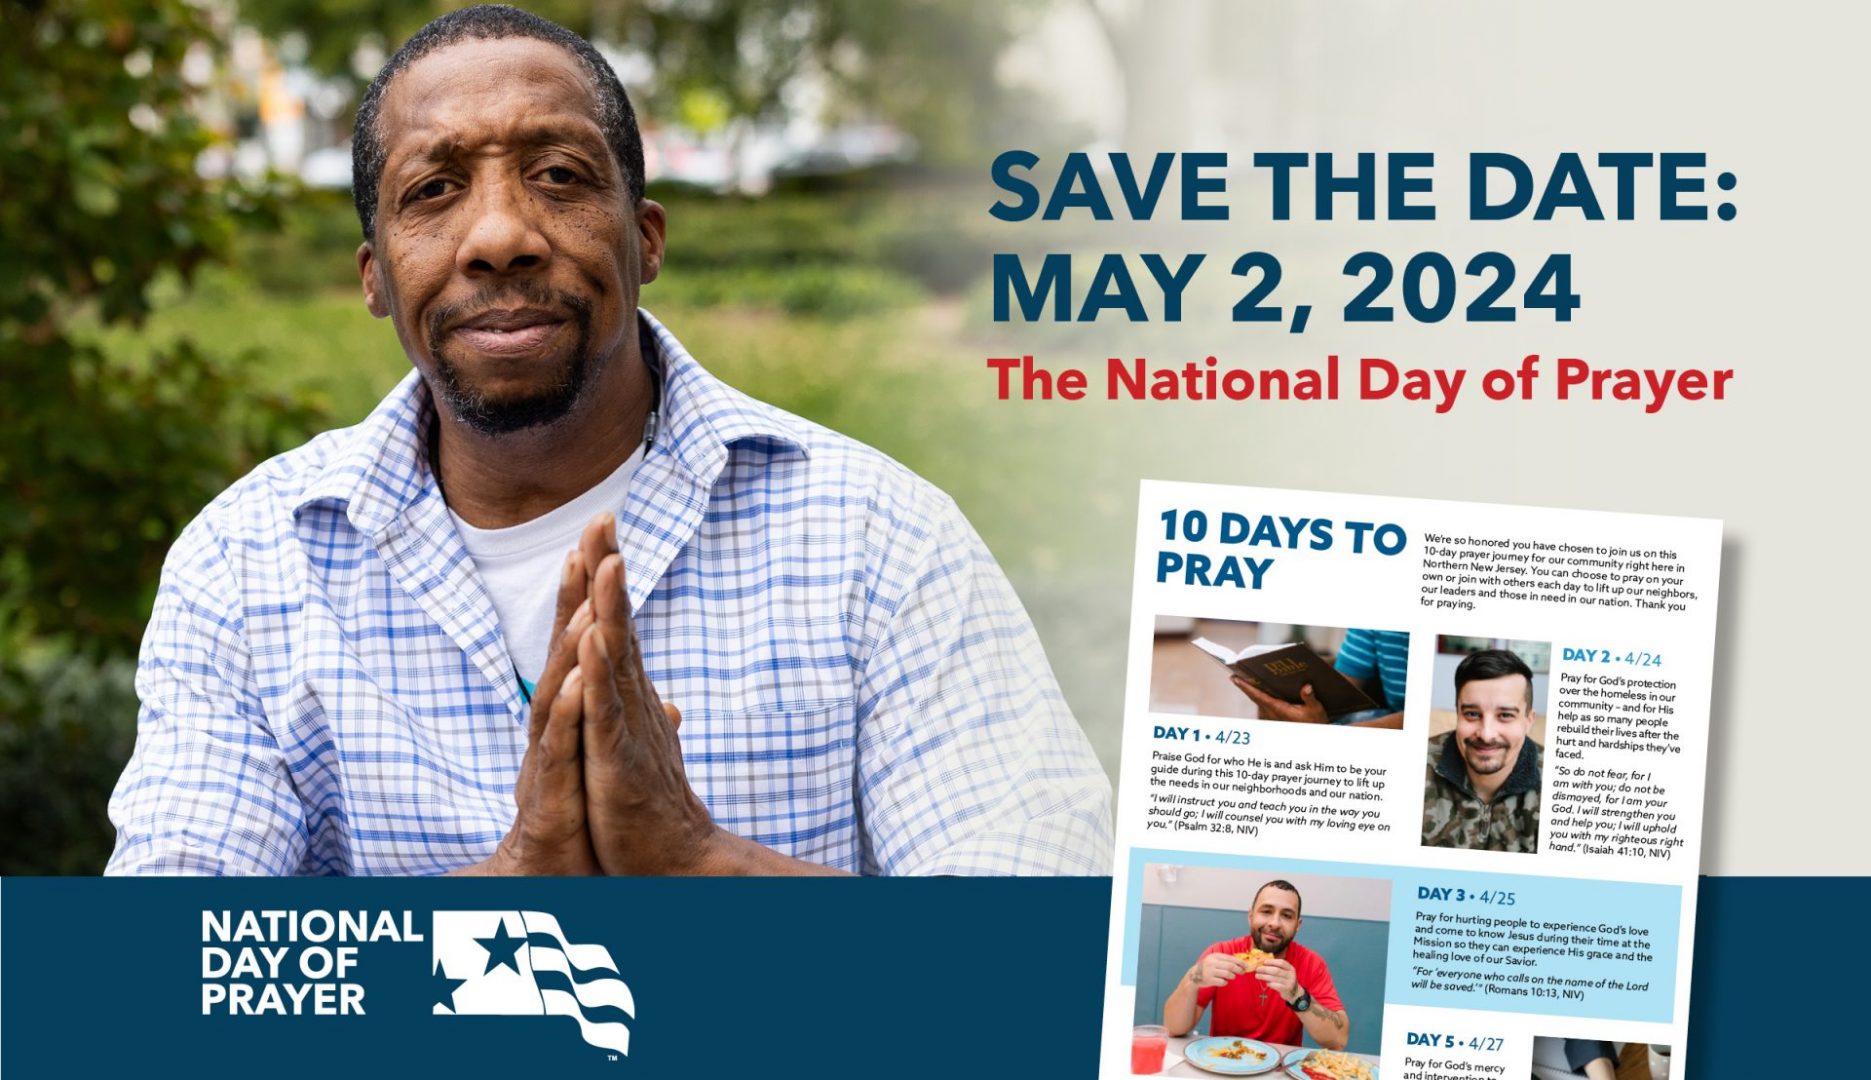 Save the date: The National Day of Prayer